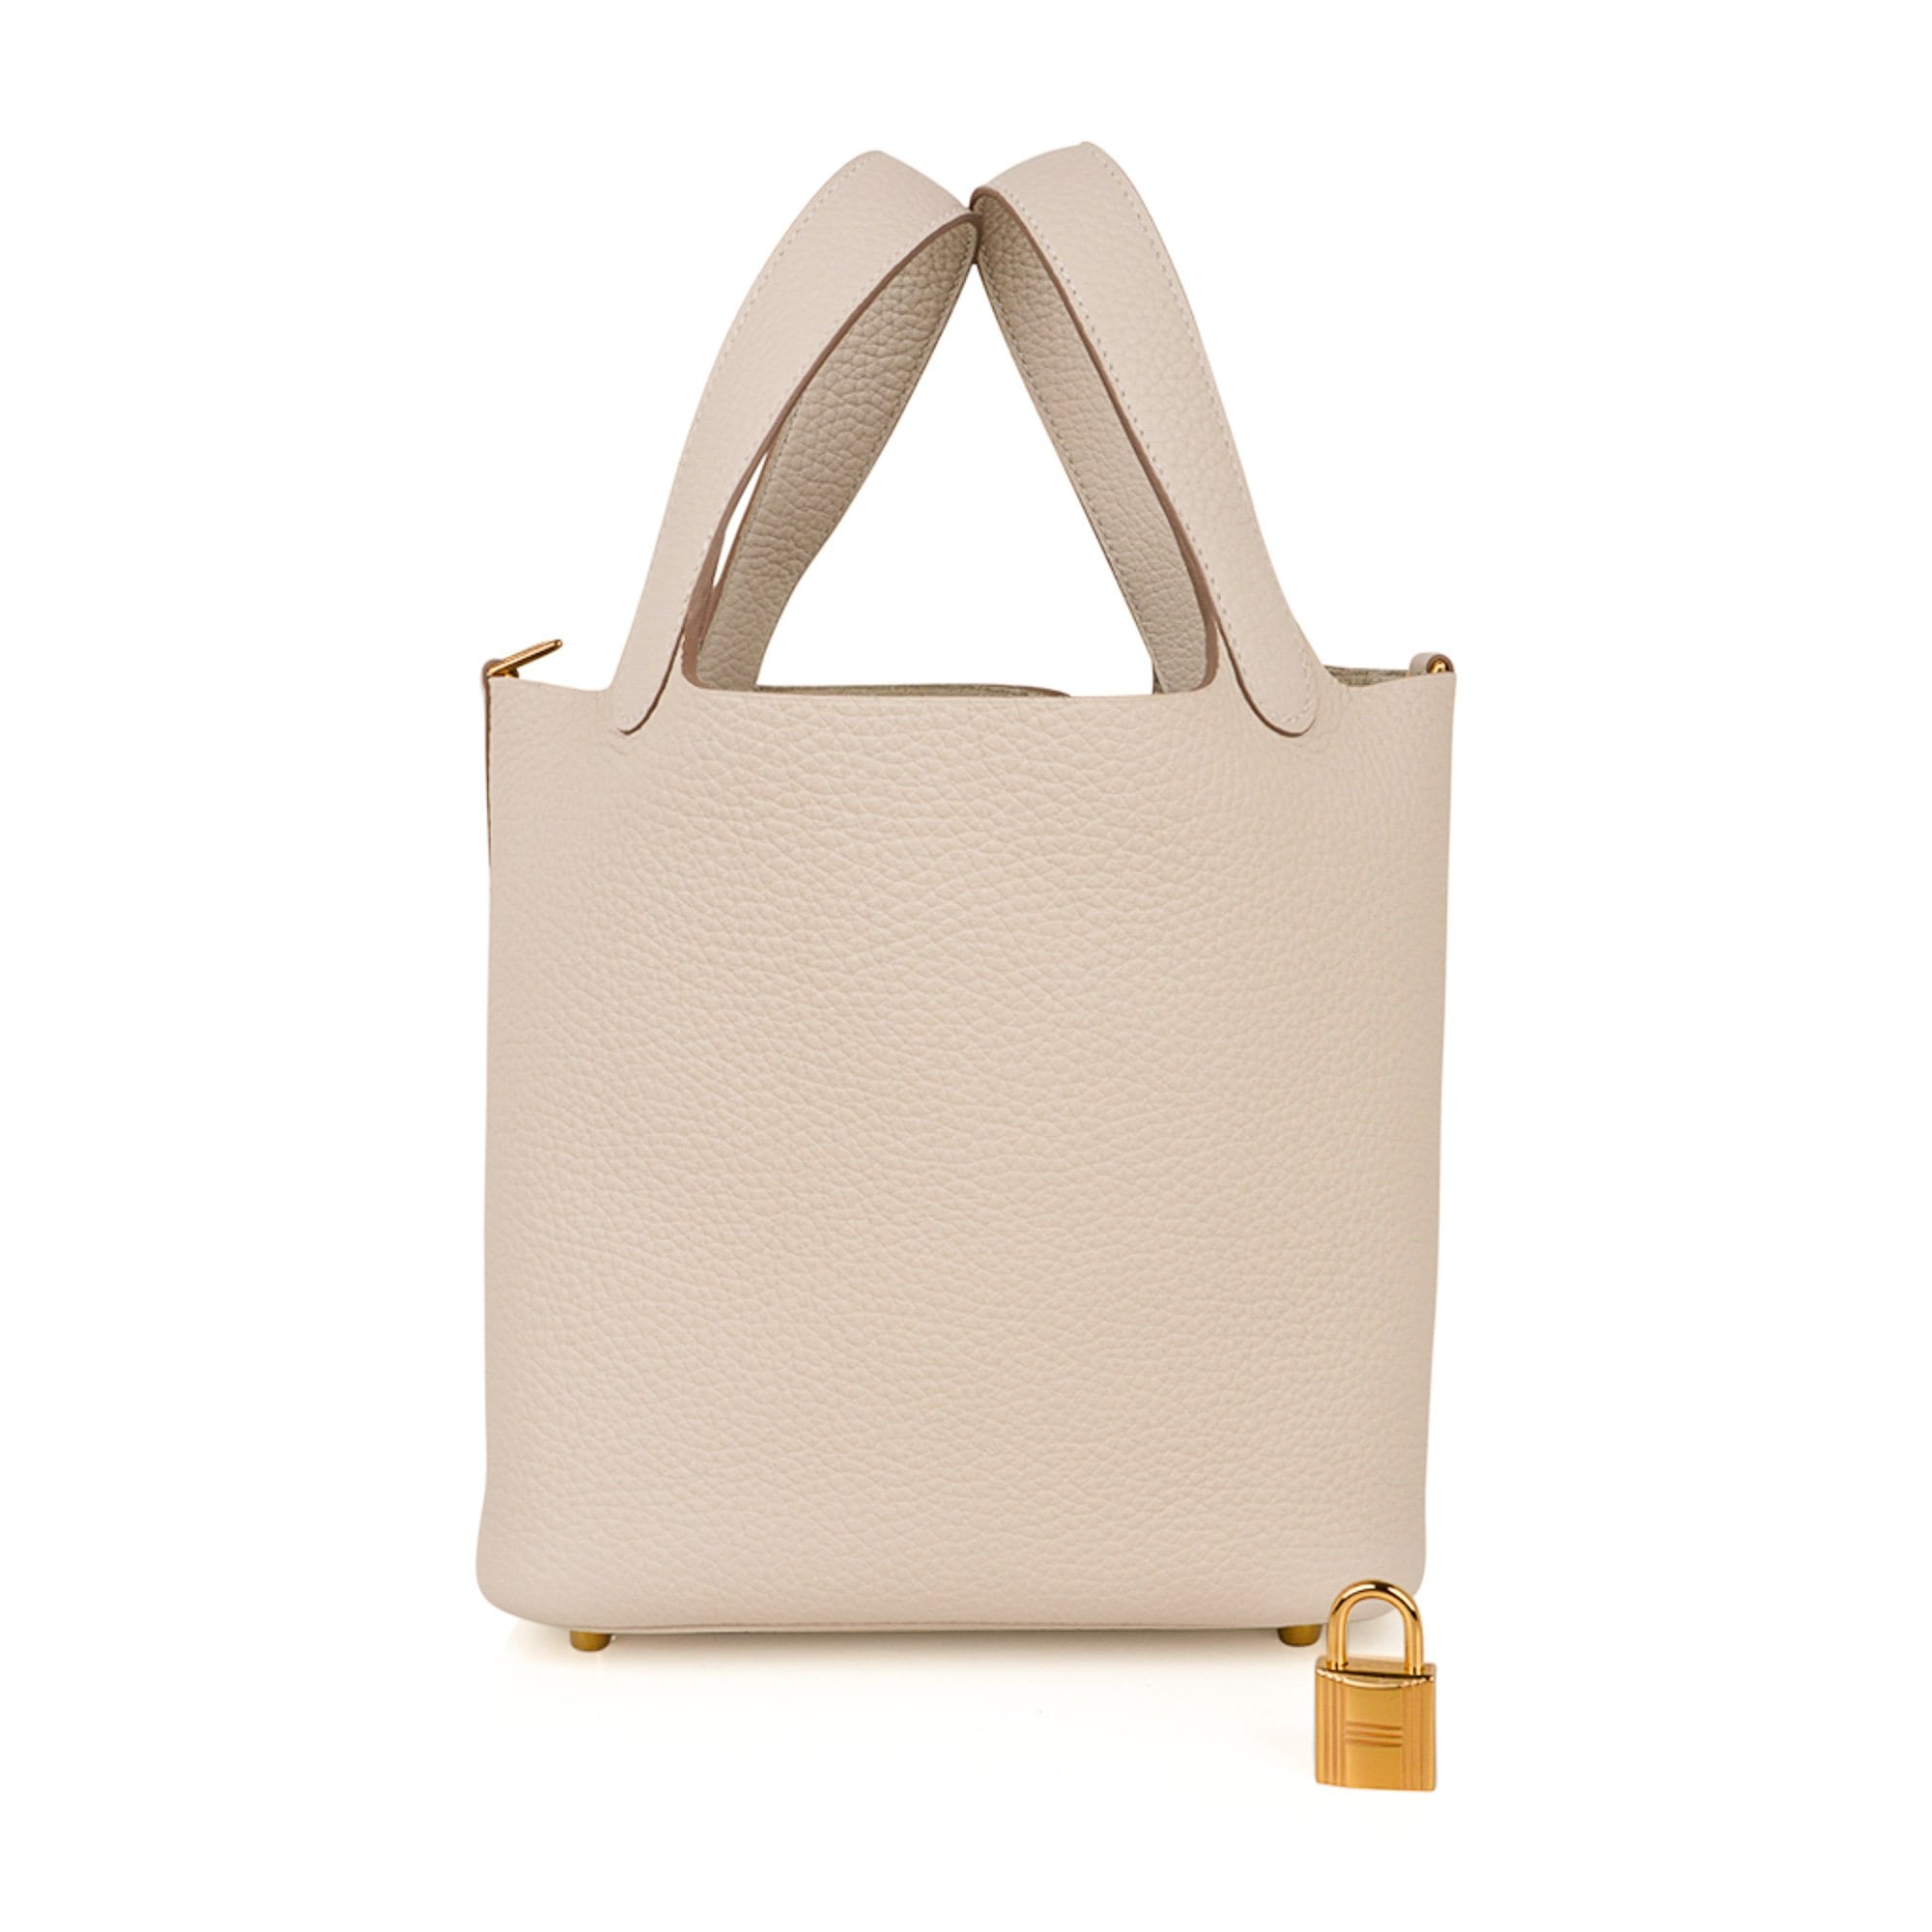 Hermes Lock 18 Bag Craie Gold Hardware Clemence Leather – Mightychic